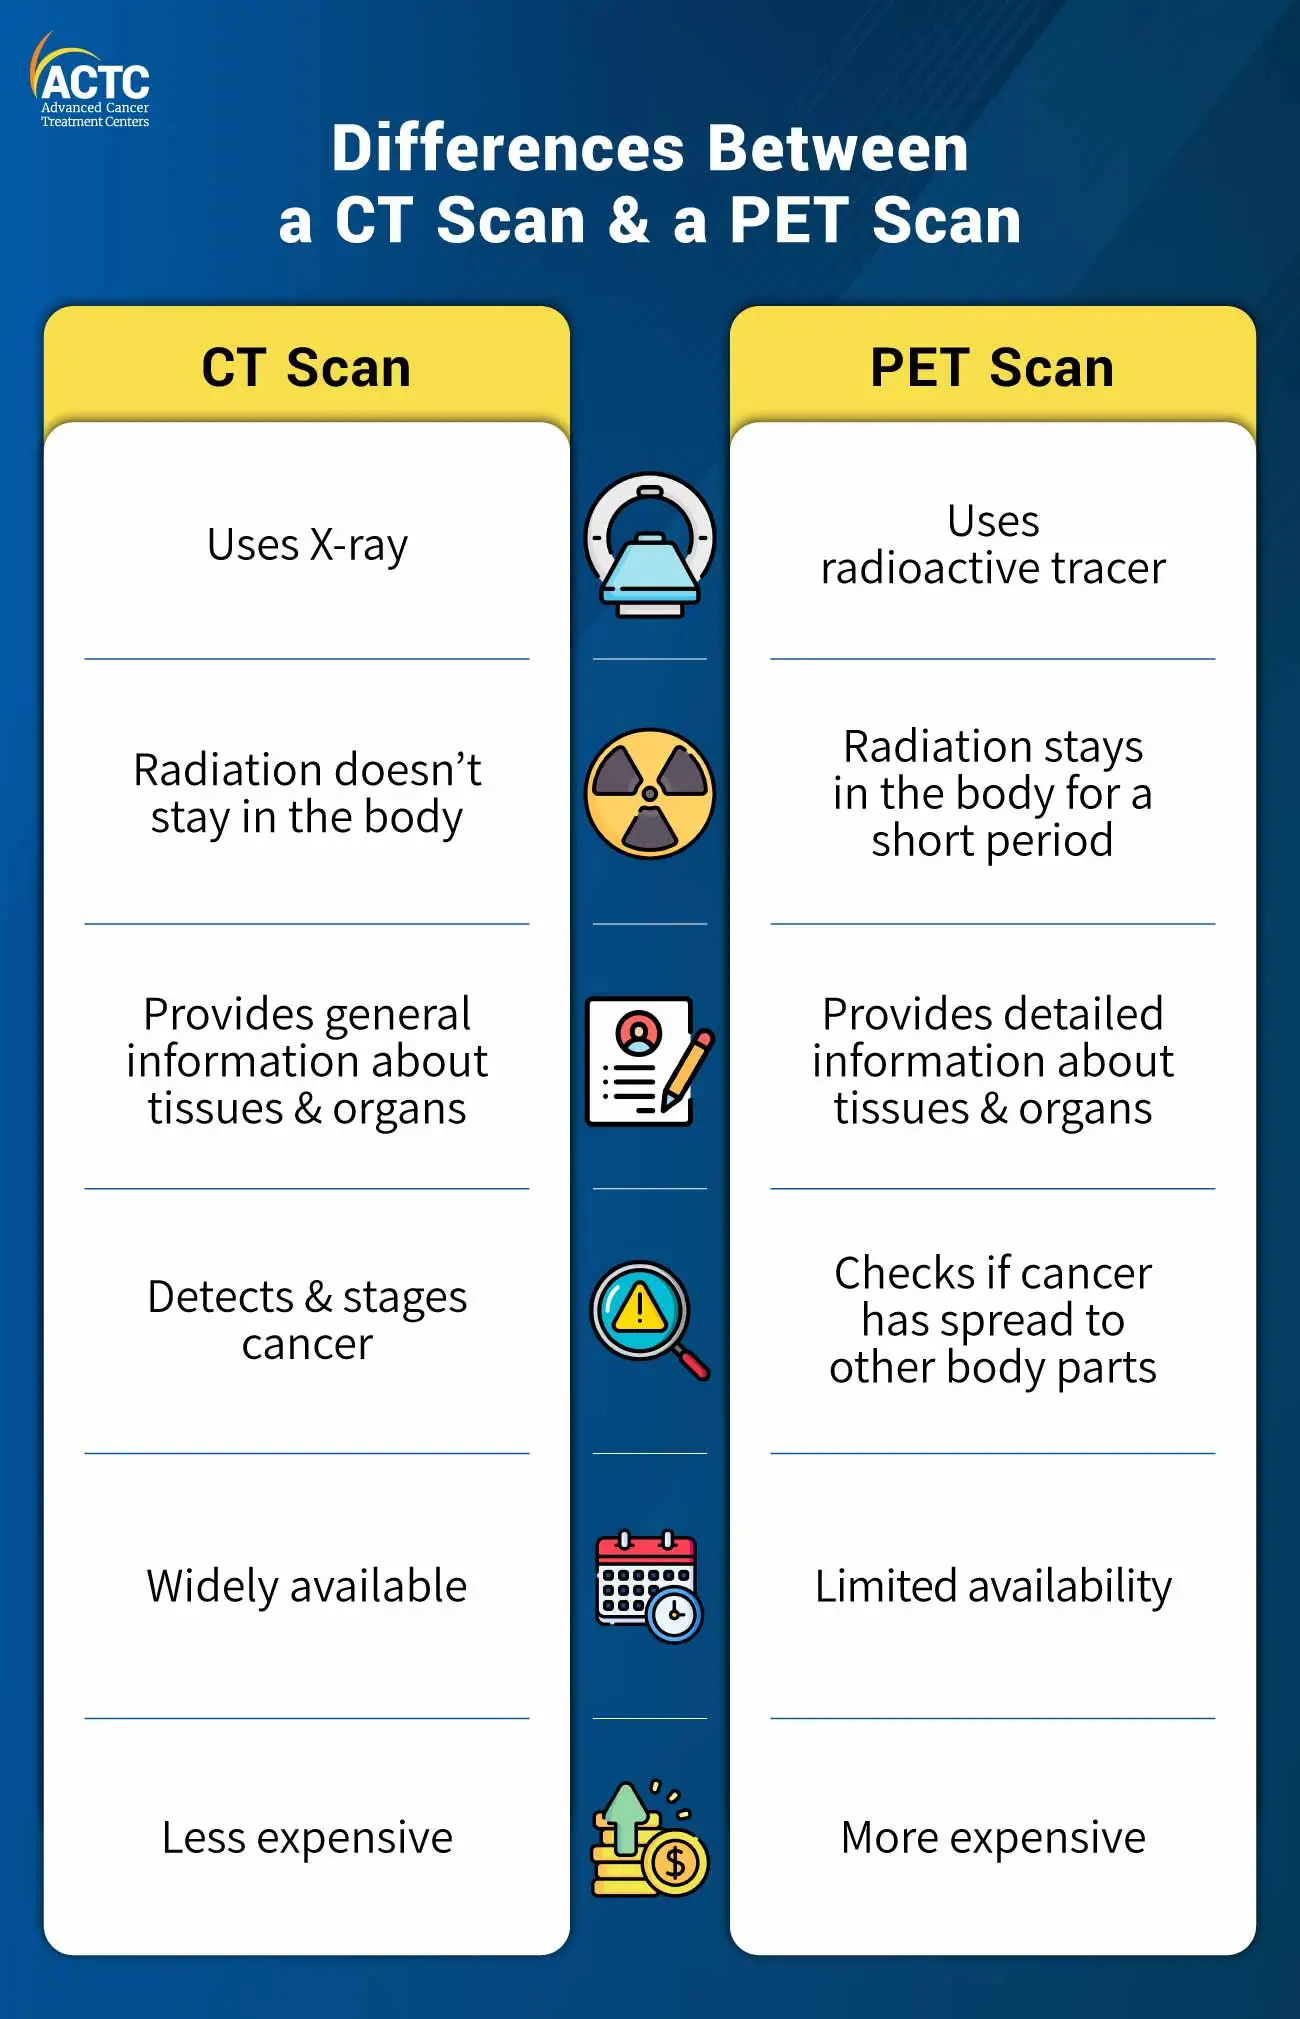 Differences Between a CT Scan and a PET Scan